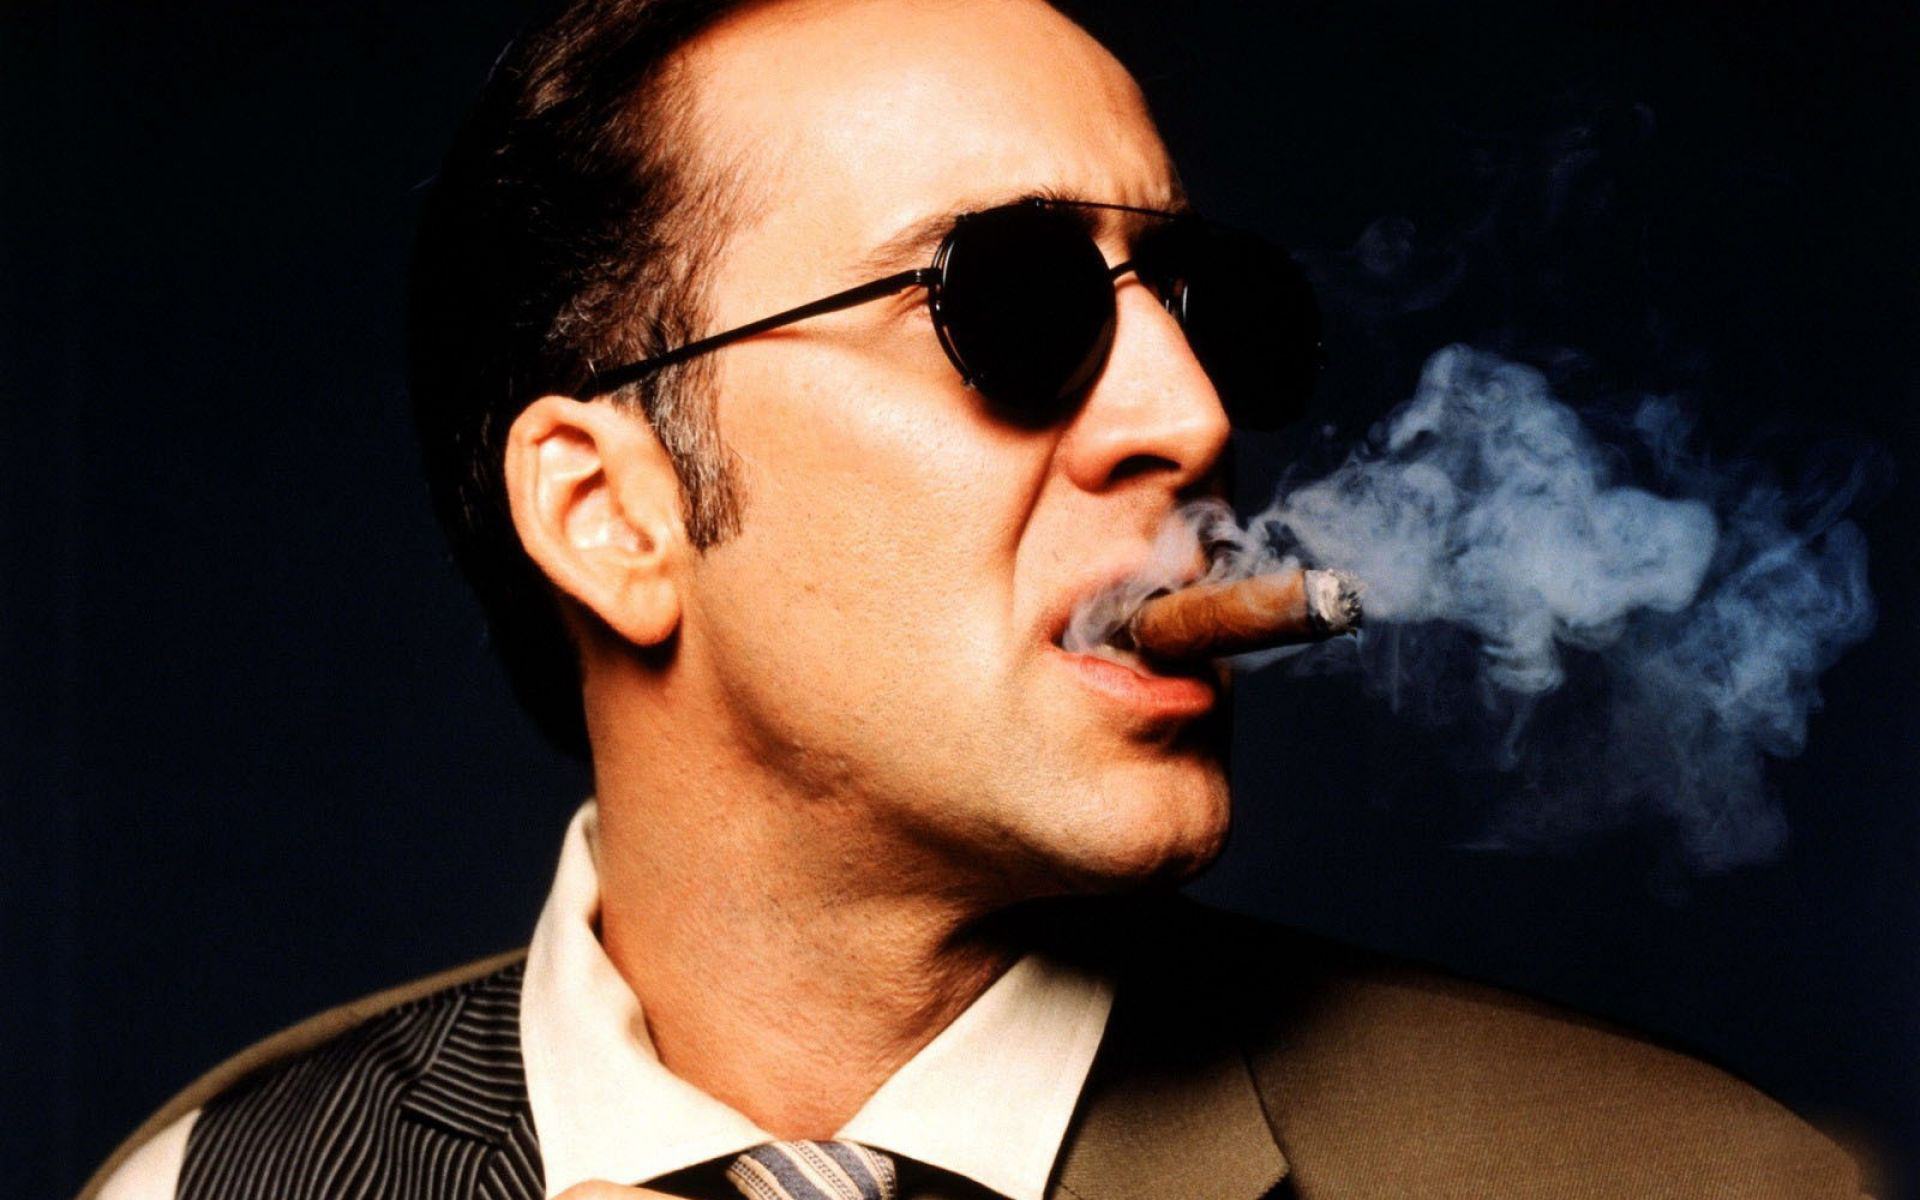 Nicolas Cage wearing sunglasses and smoking a tobacco